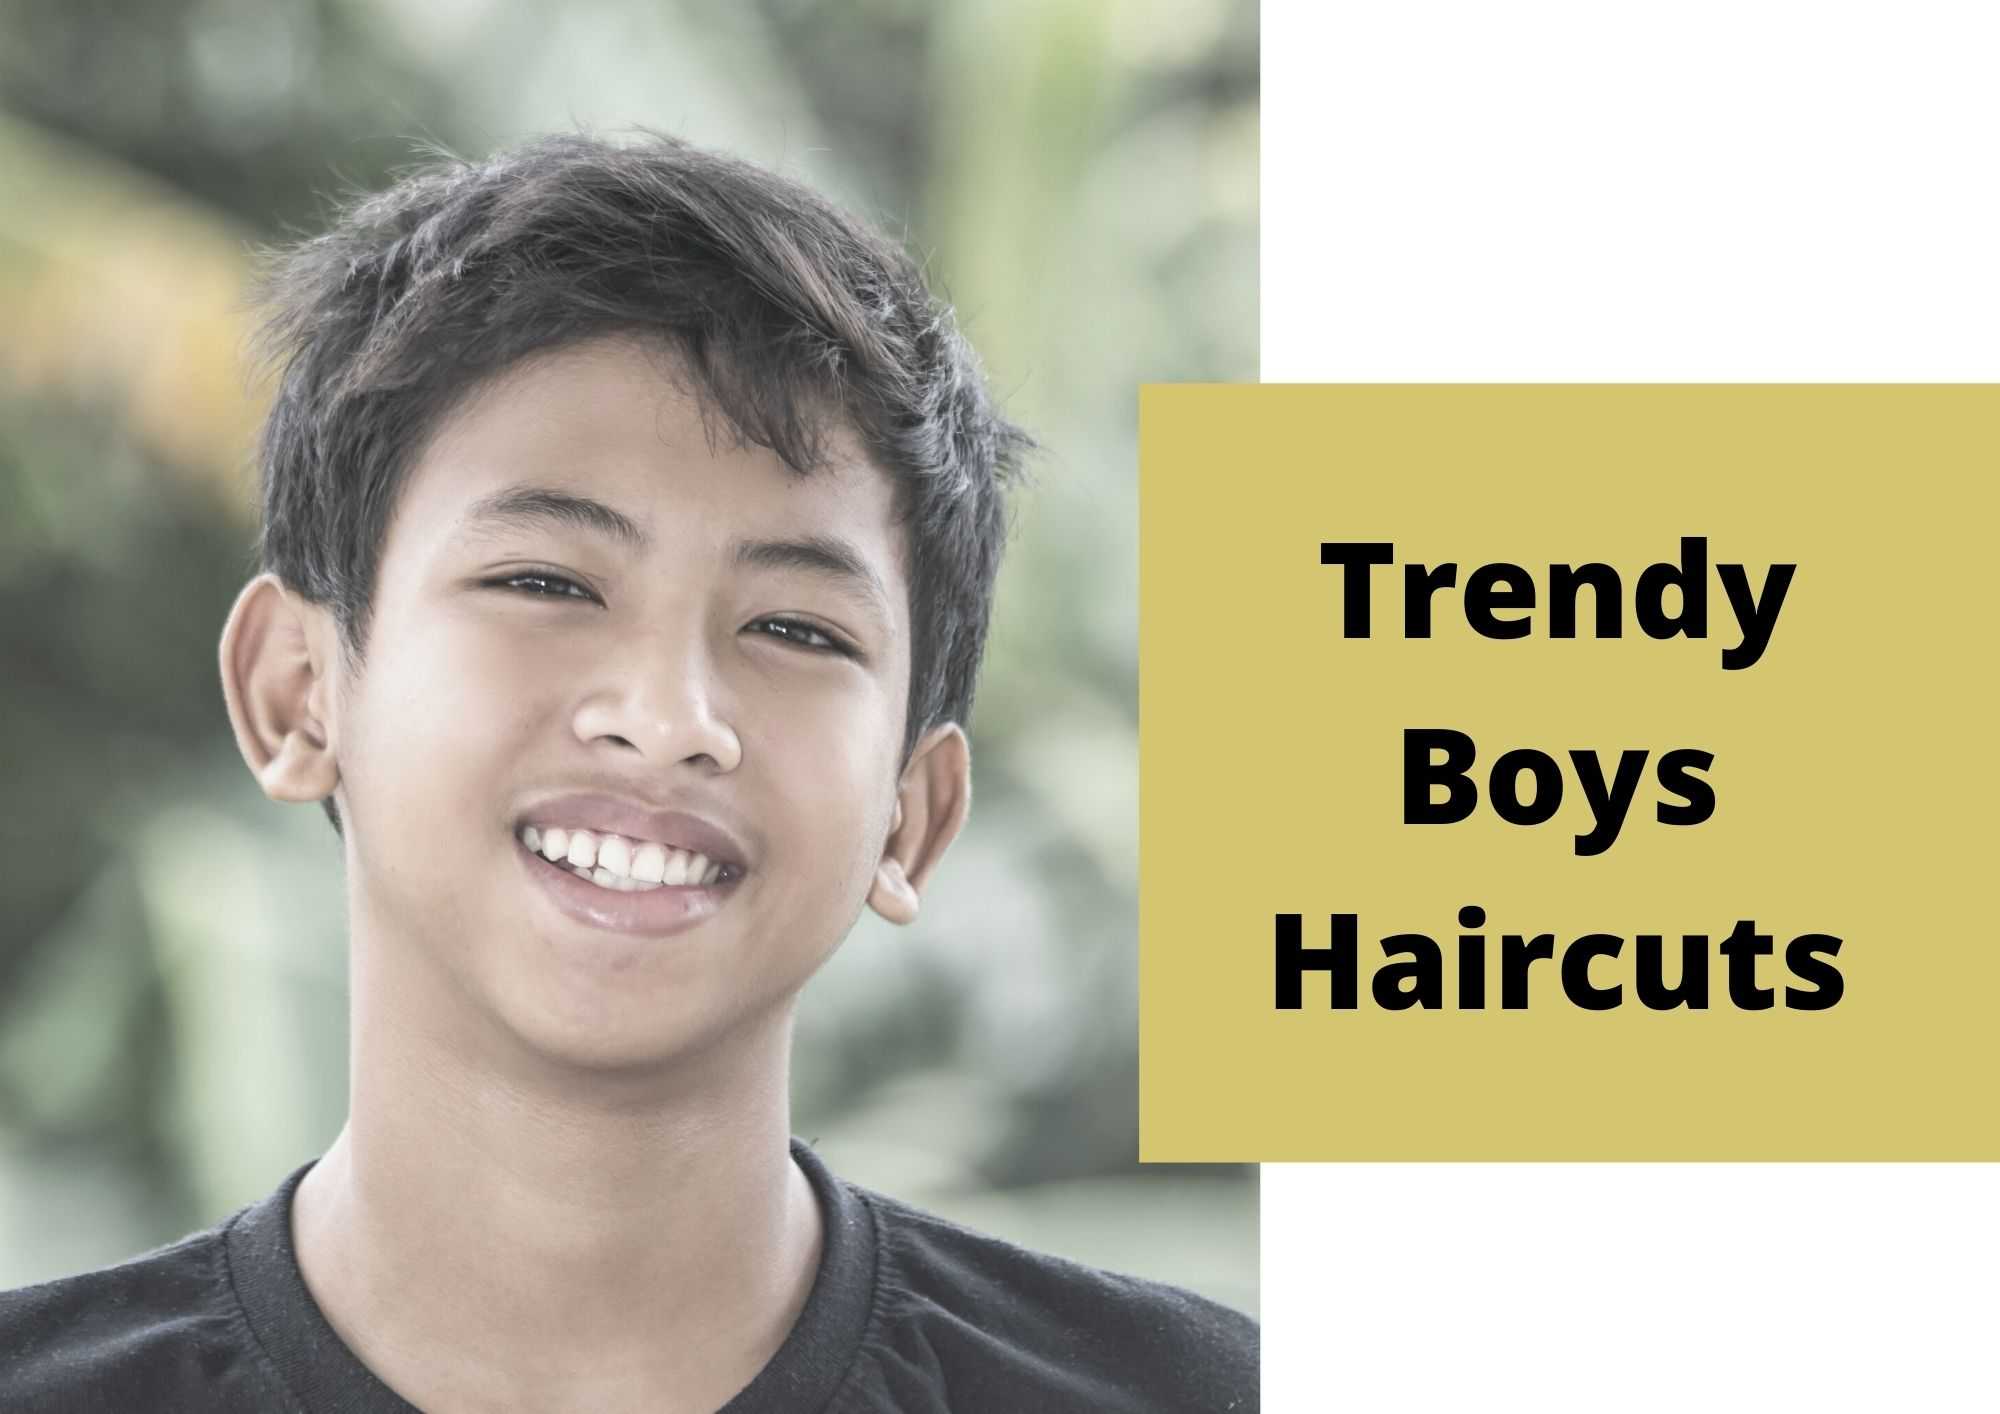 NATURAL HAIRSTYLES (GUY EDITION) - Kpop Korean Hair and Style